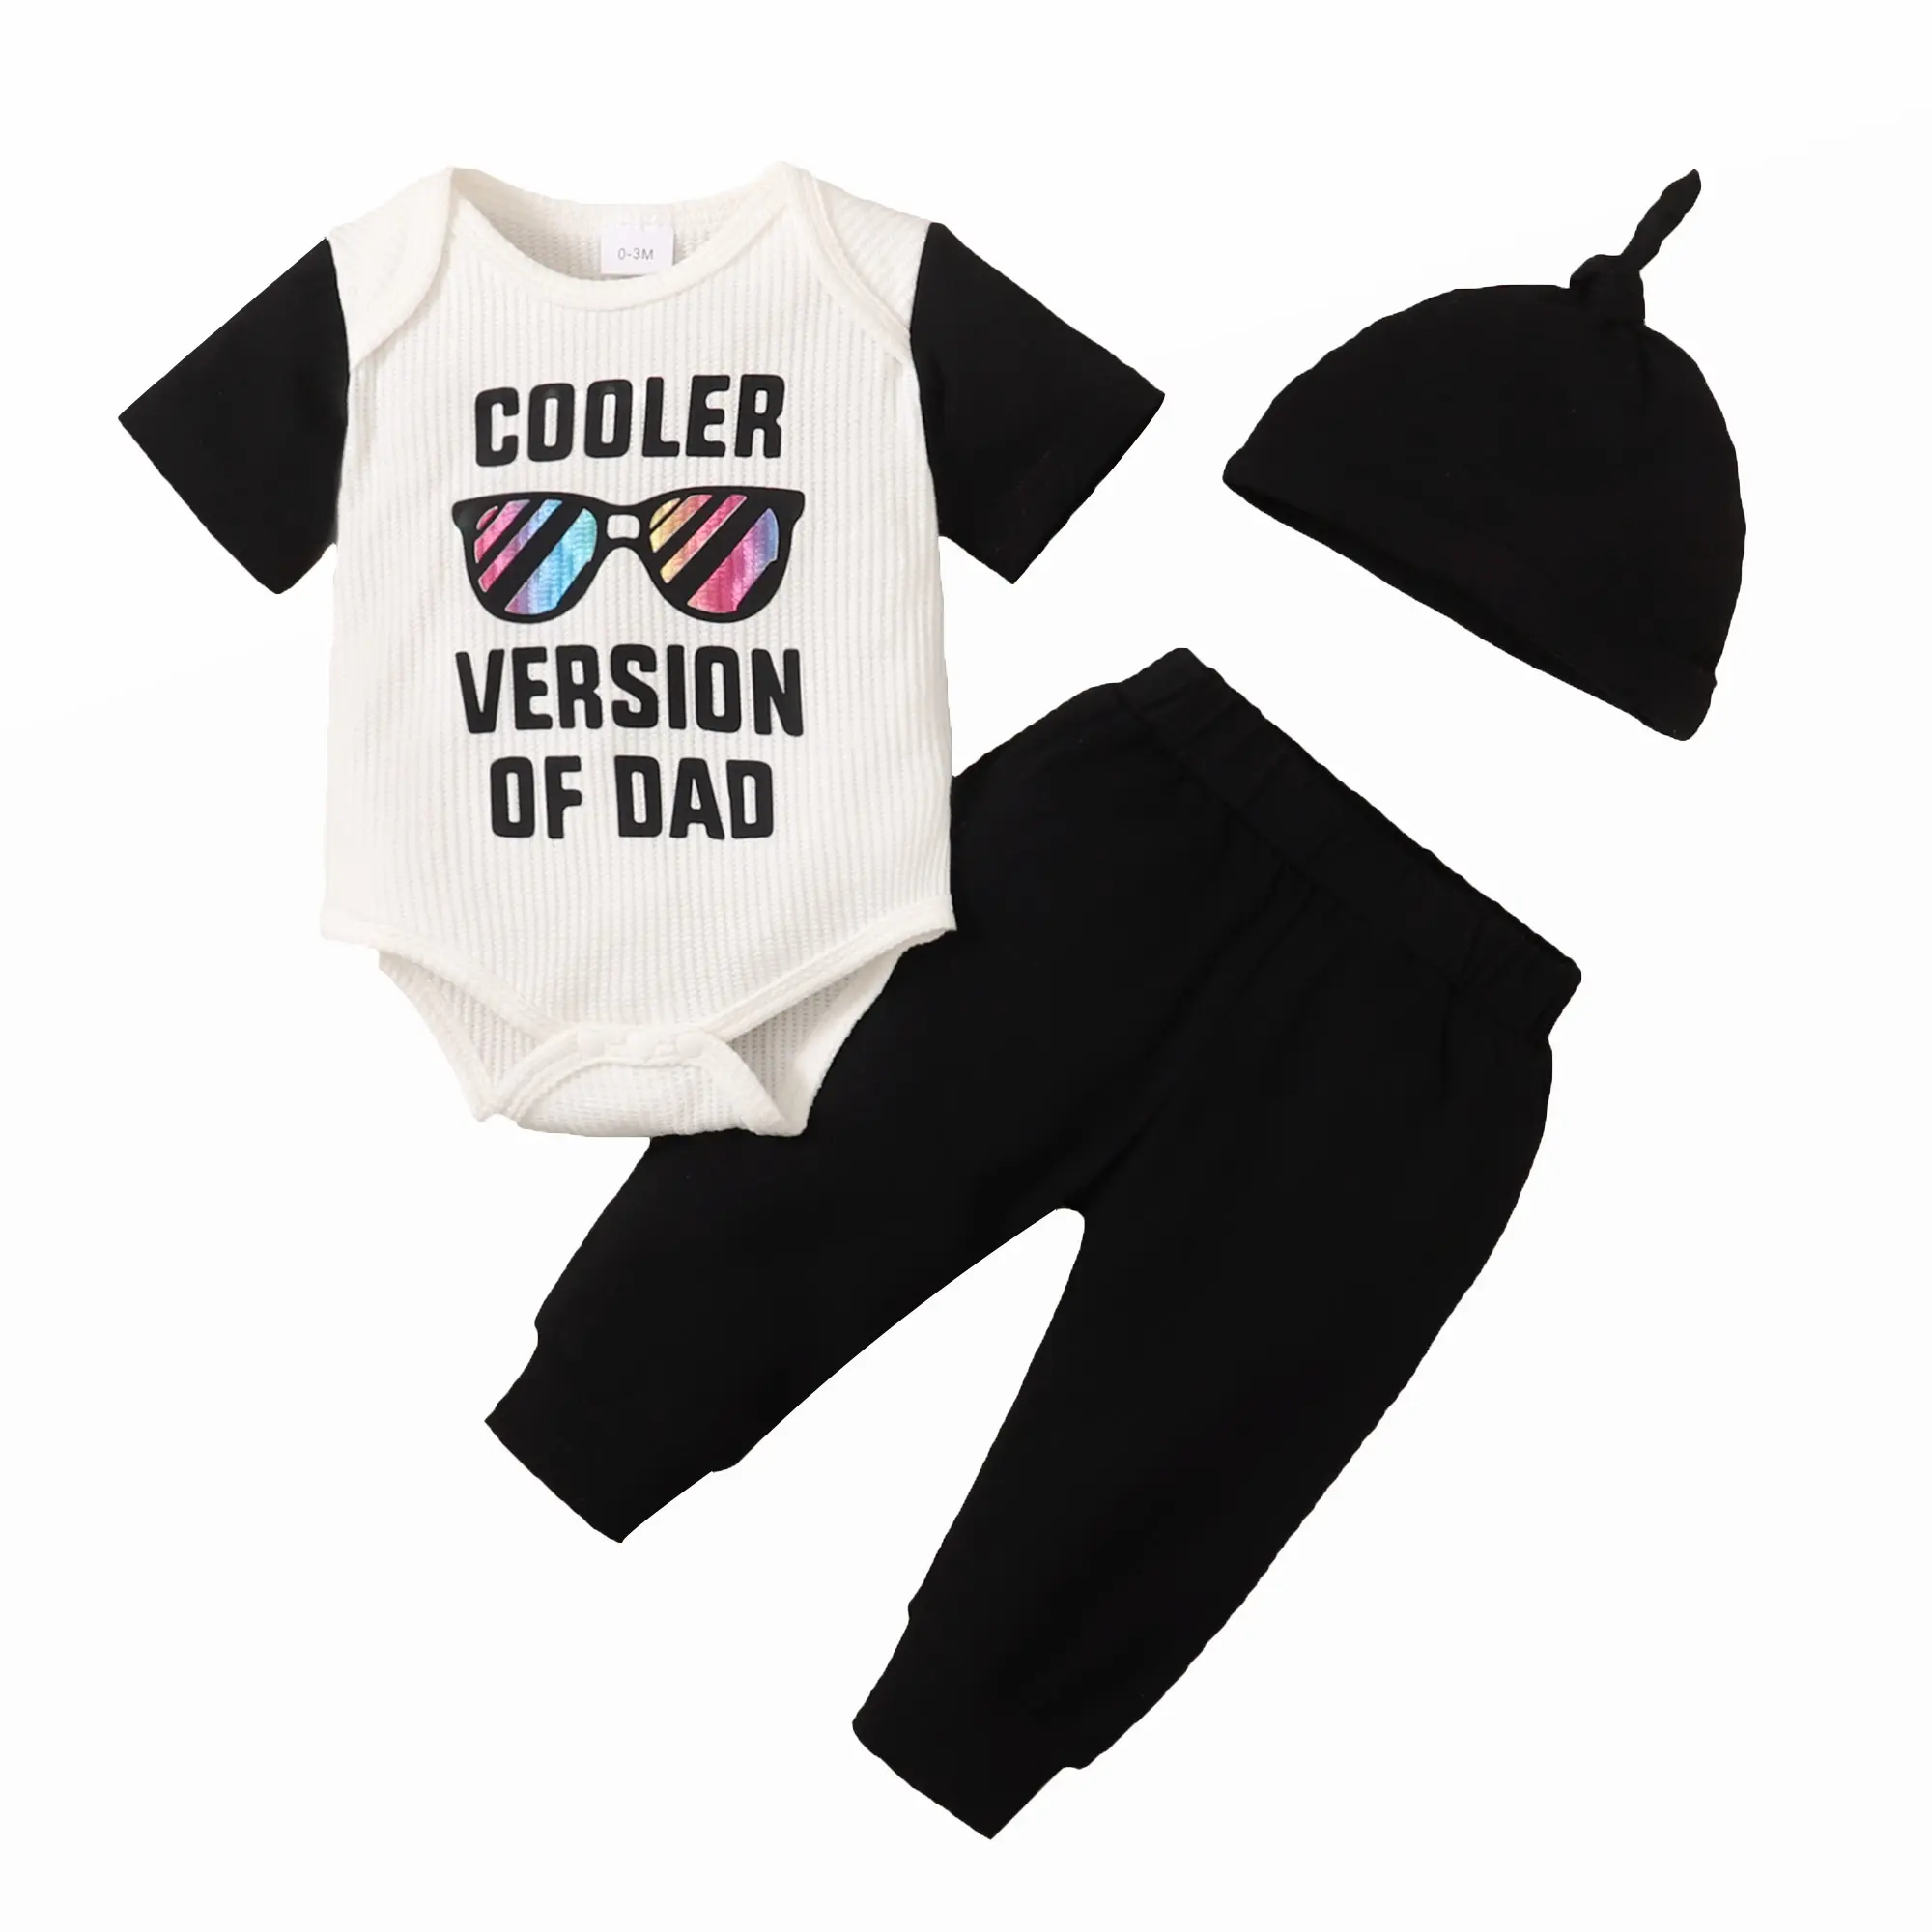 Catpapa 0-3 Months Baby Boy Clothes Newborn Infant Boy Outfit Set Black Letter Printed for Baby Boys